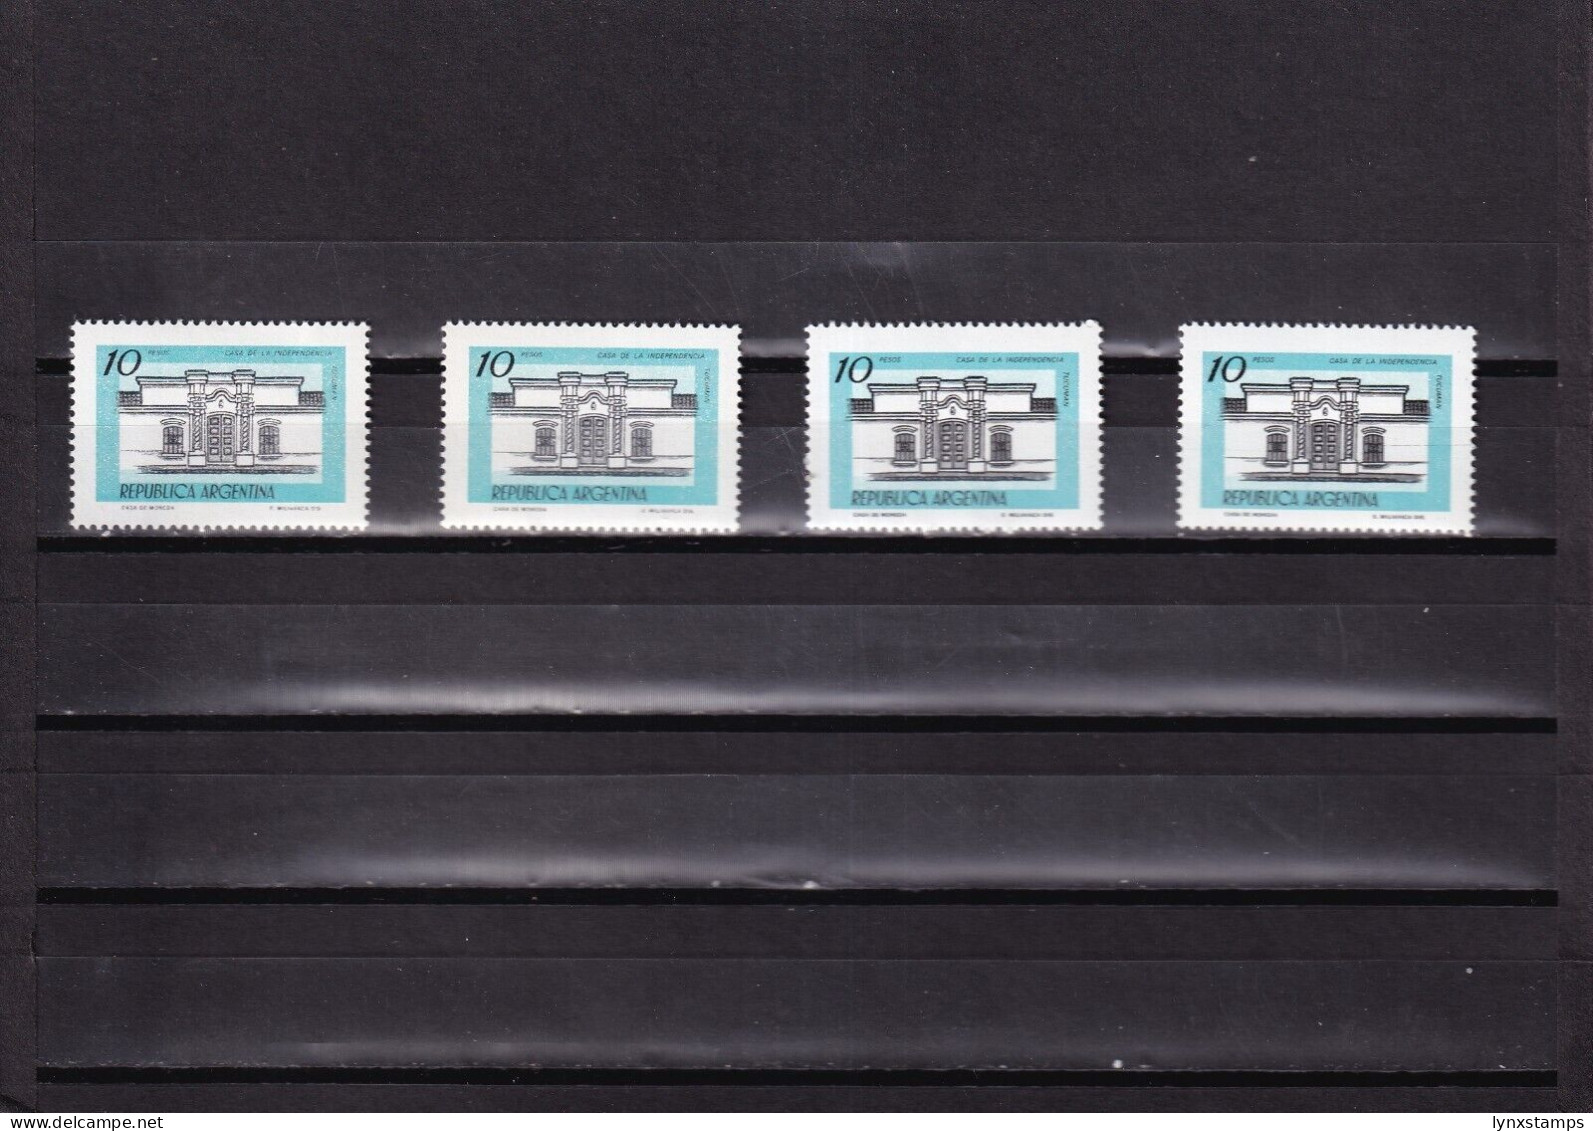 ER03 Argentina 1979 House Of Independence, Tucuman - MNH Stamps - Used Stamps